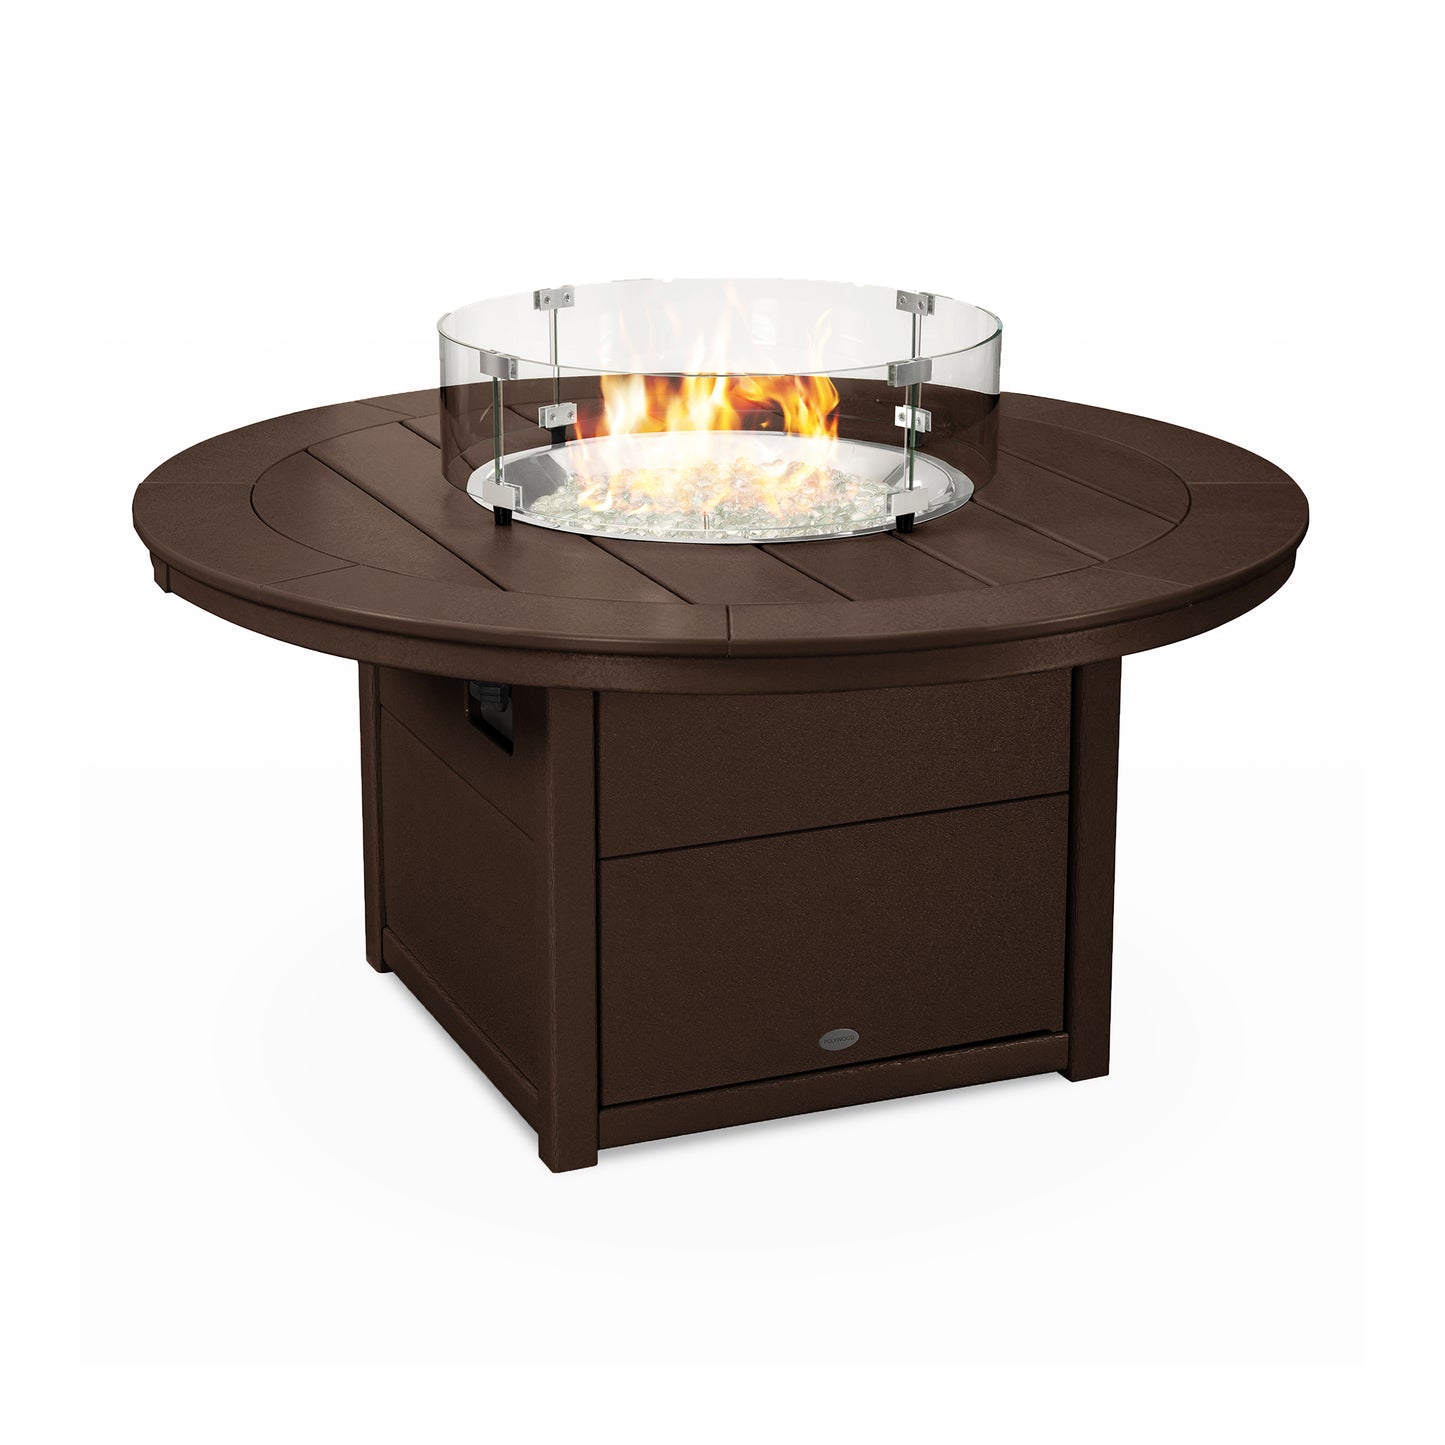 A round, brown POLYWOOD outdoor propane tank fire pit table with flames at the center, surrounded by a clear glass wind guard, set on a white background.